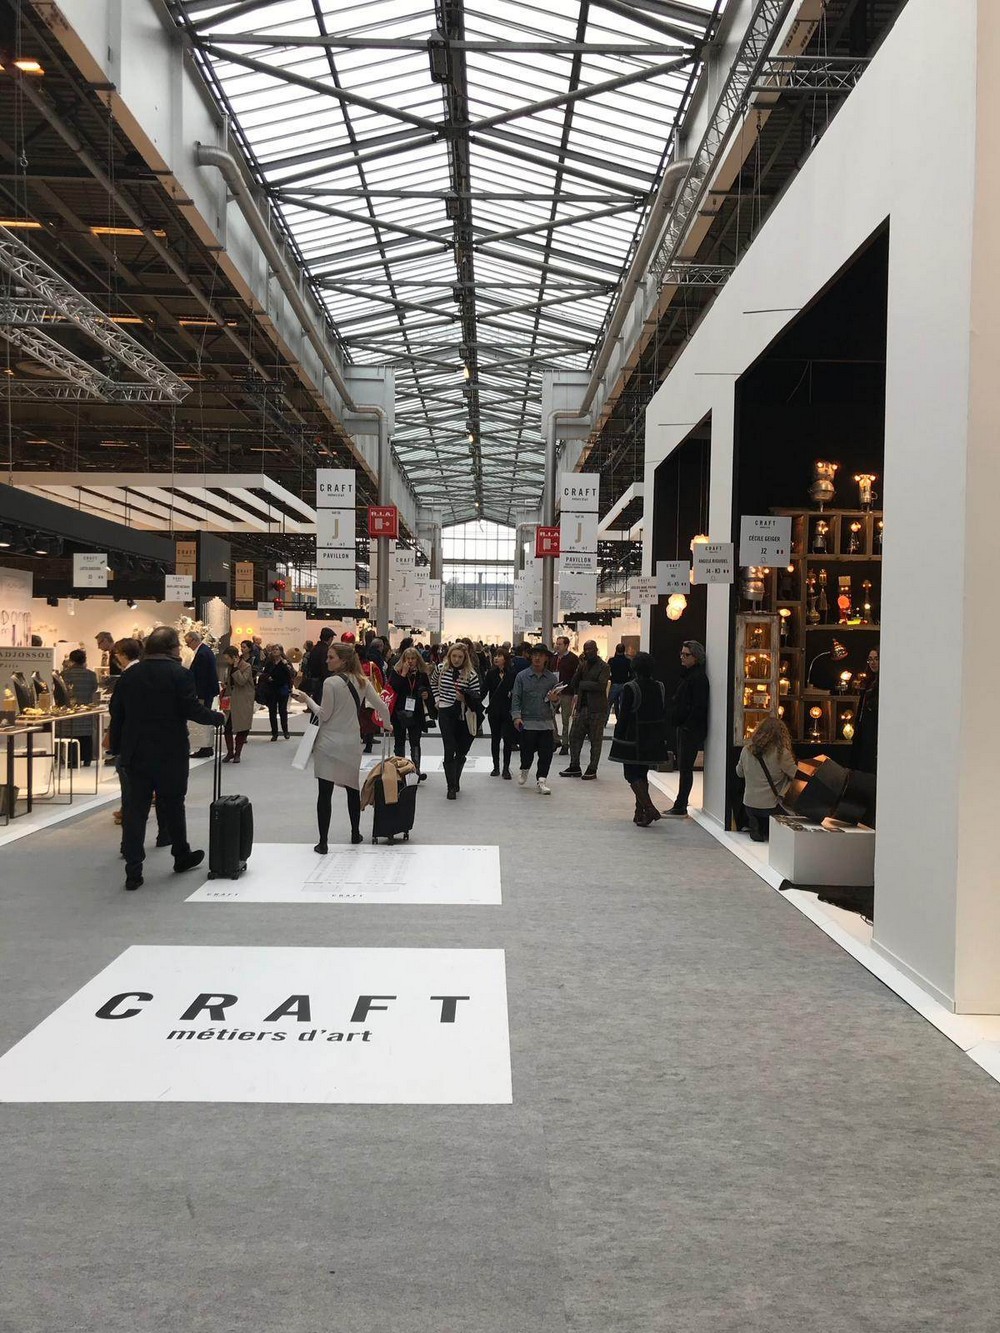 Maison et Objet 2020 - 3 Reasons Why You Should Go To The Event!